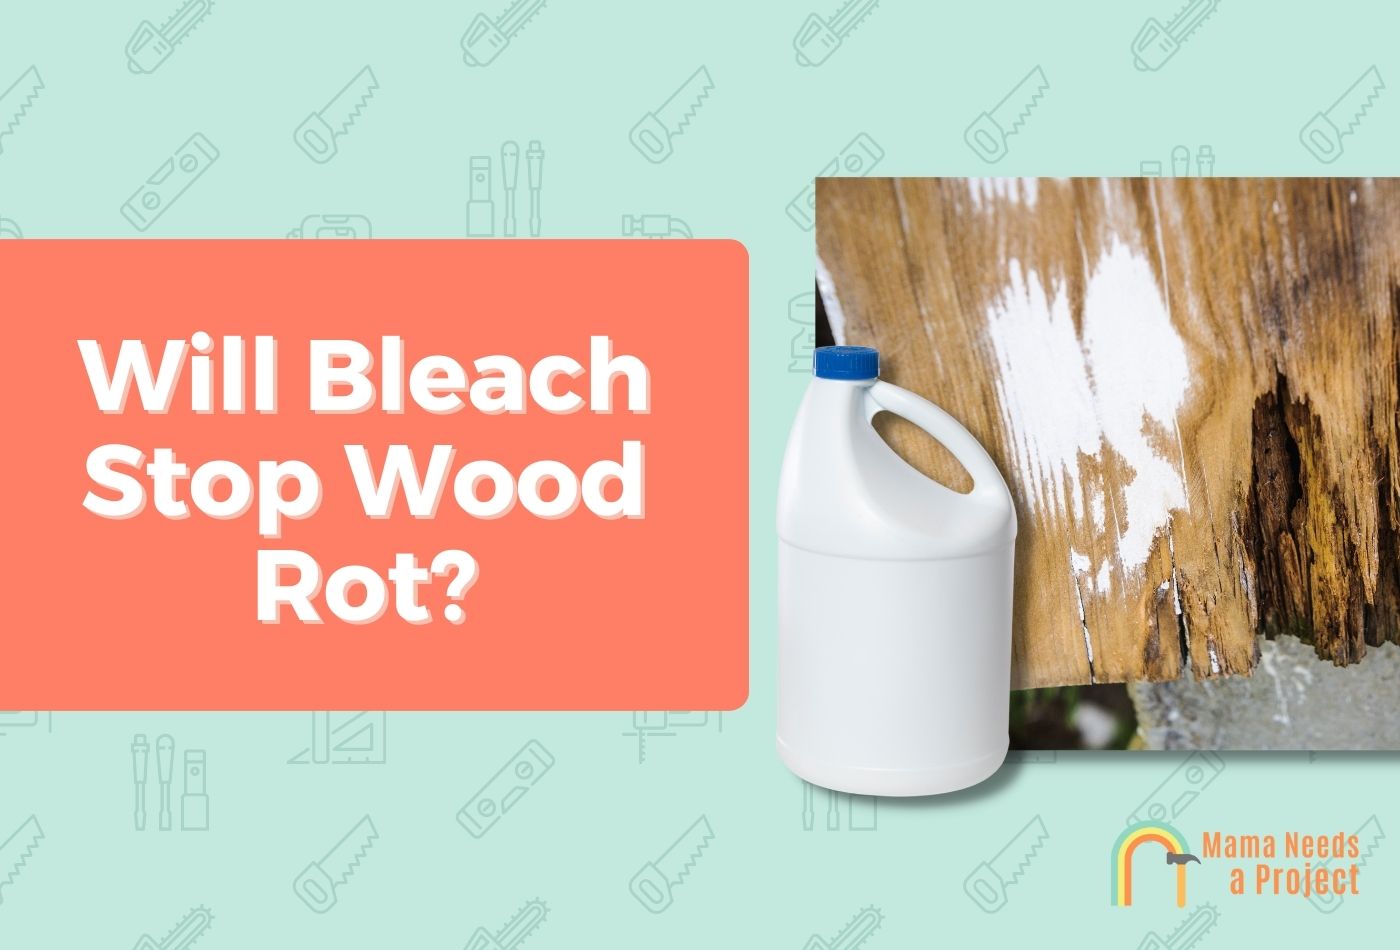 Will Bleach Stop Wood Rot